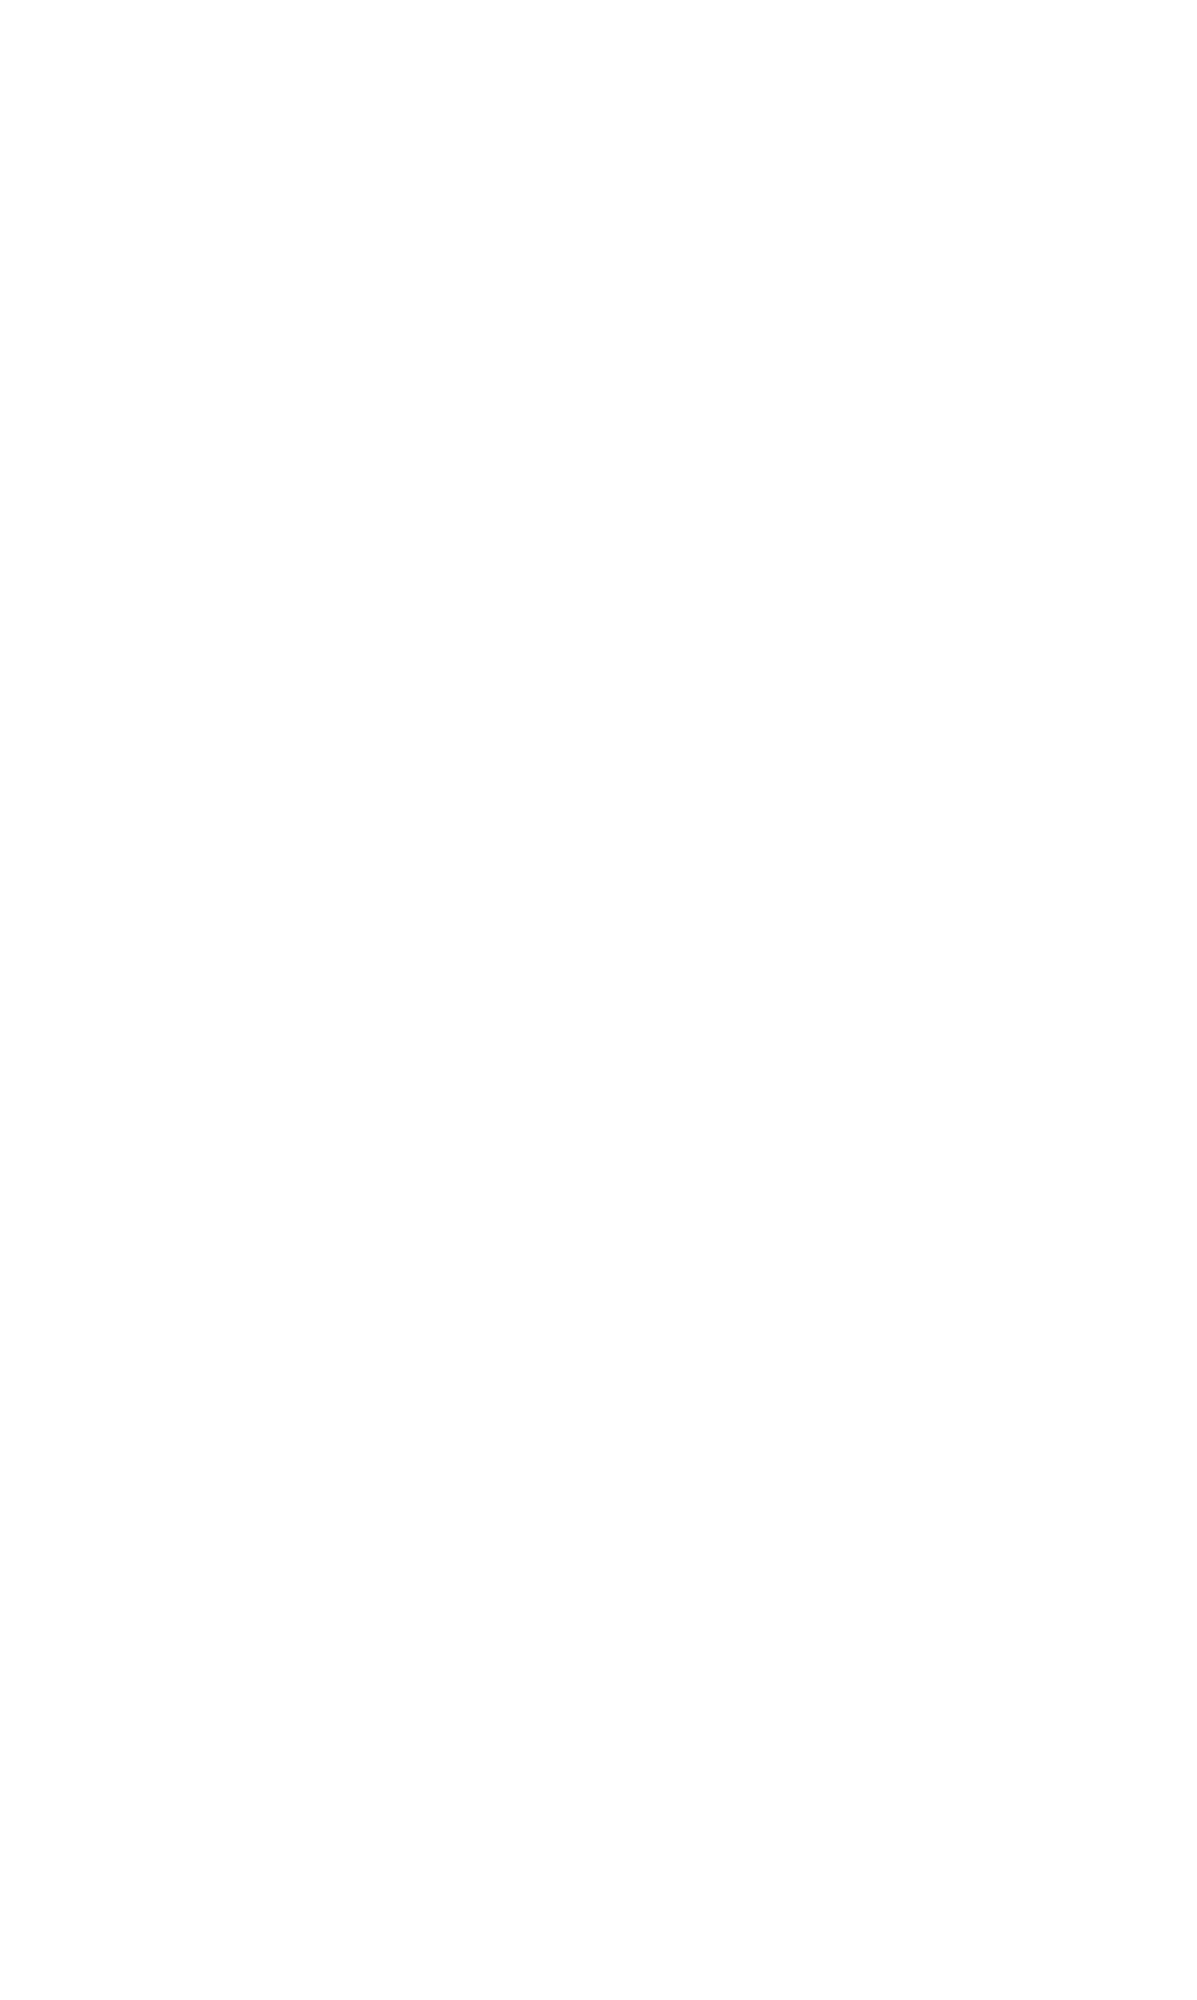 Fable + Stey